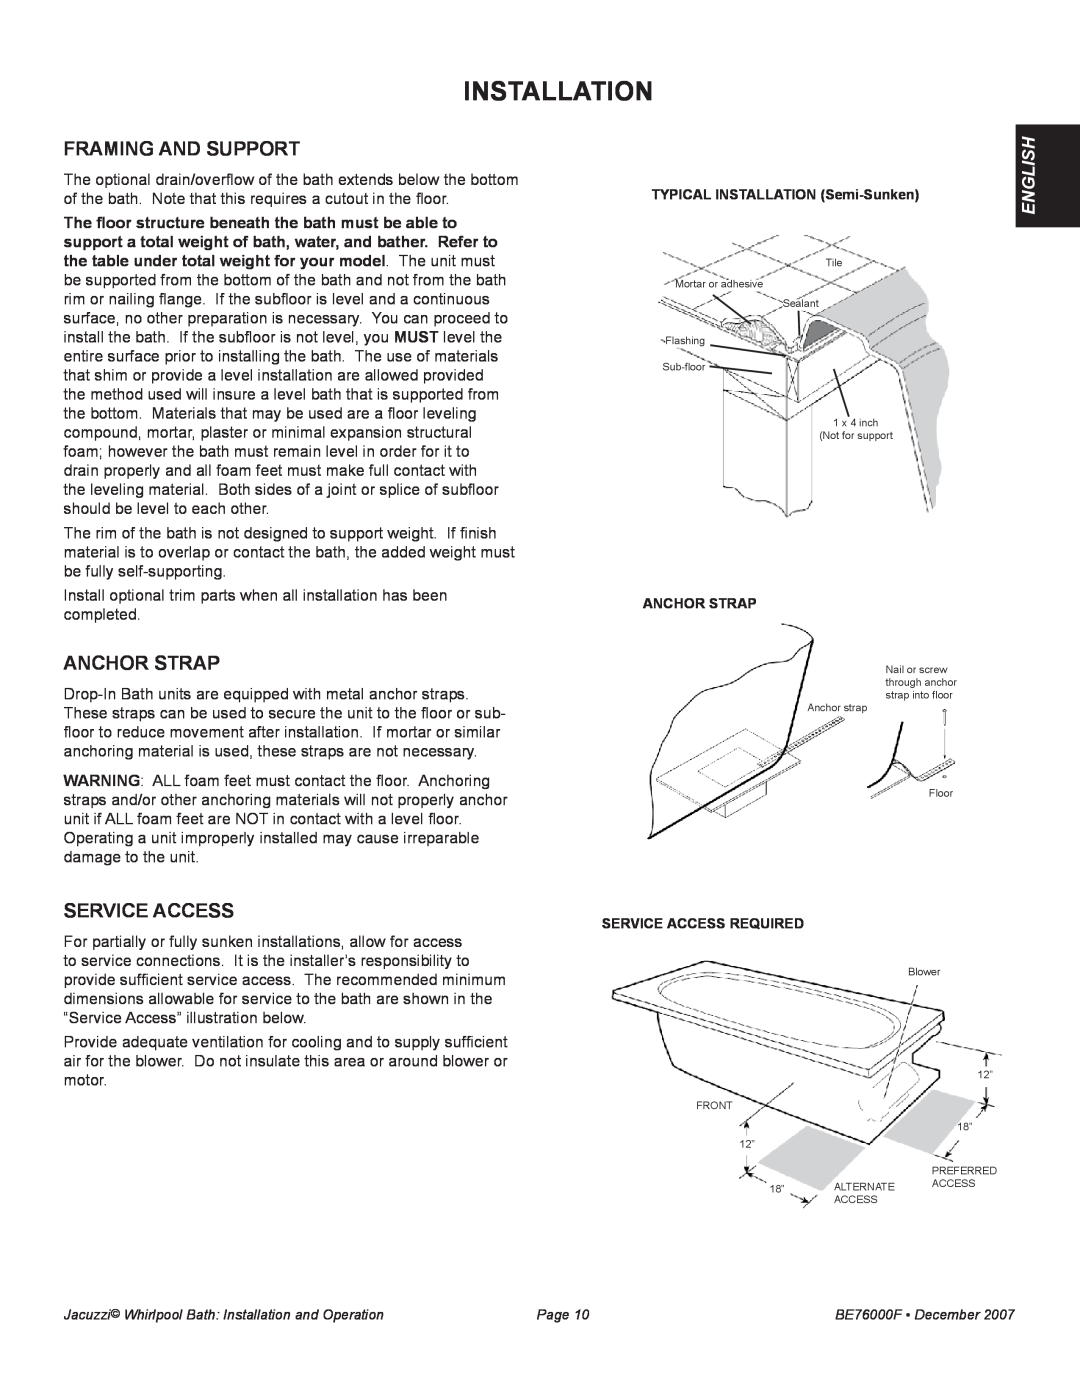 Jacuzzi LUXURY SERIES manual Installation, Framing and Support, Anchor Strap, Service Access, English 